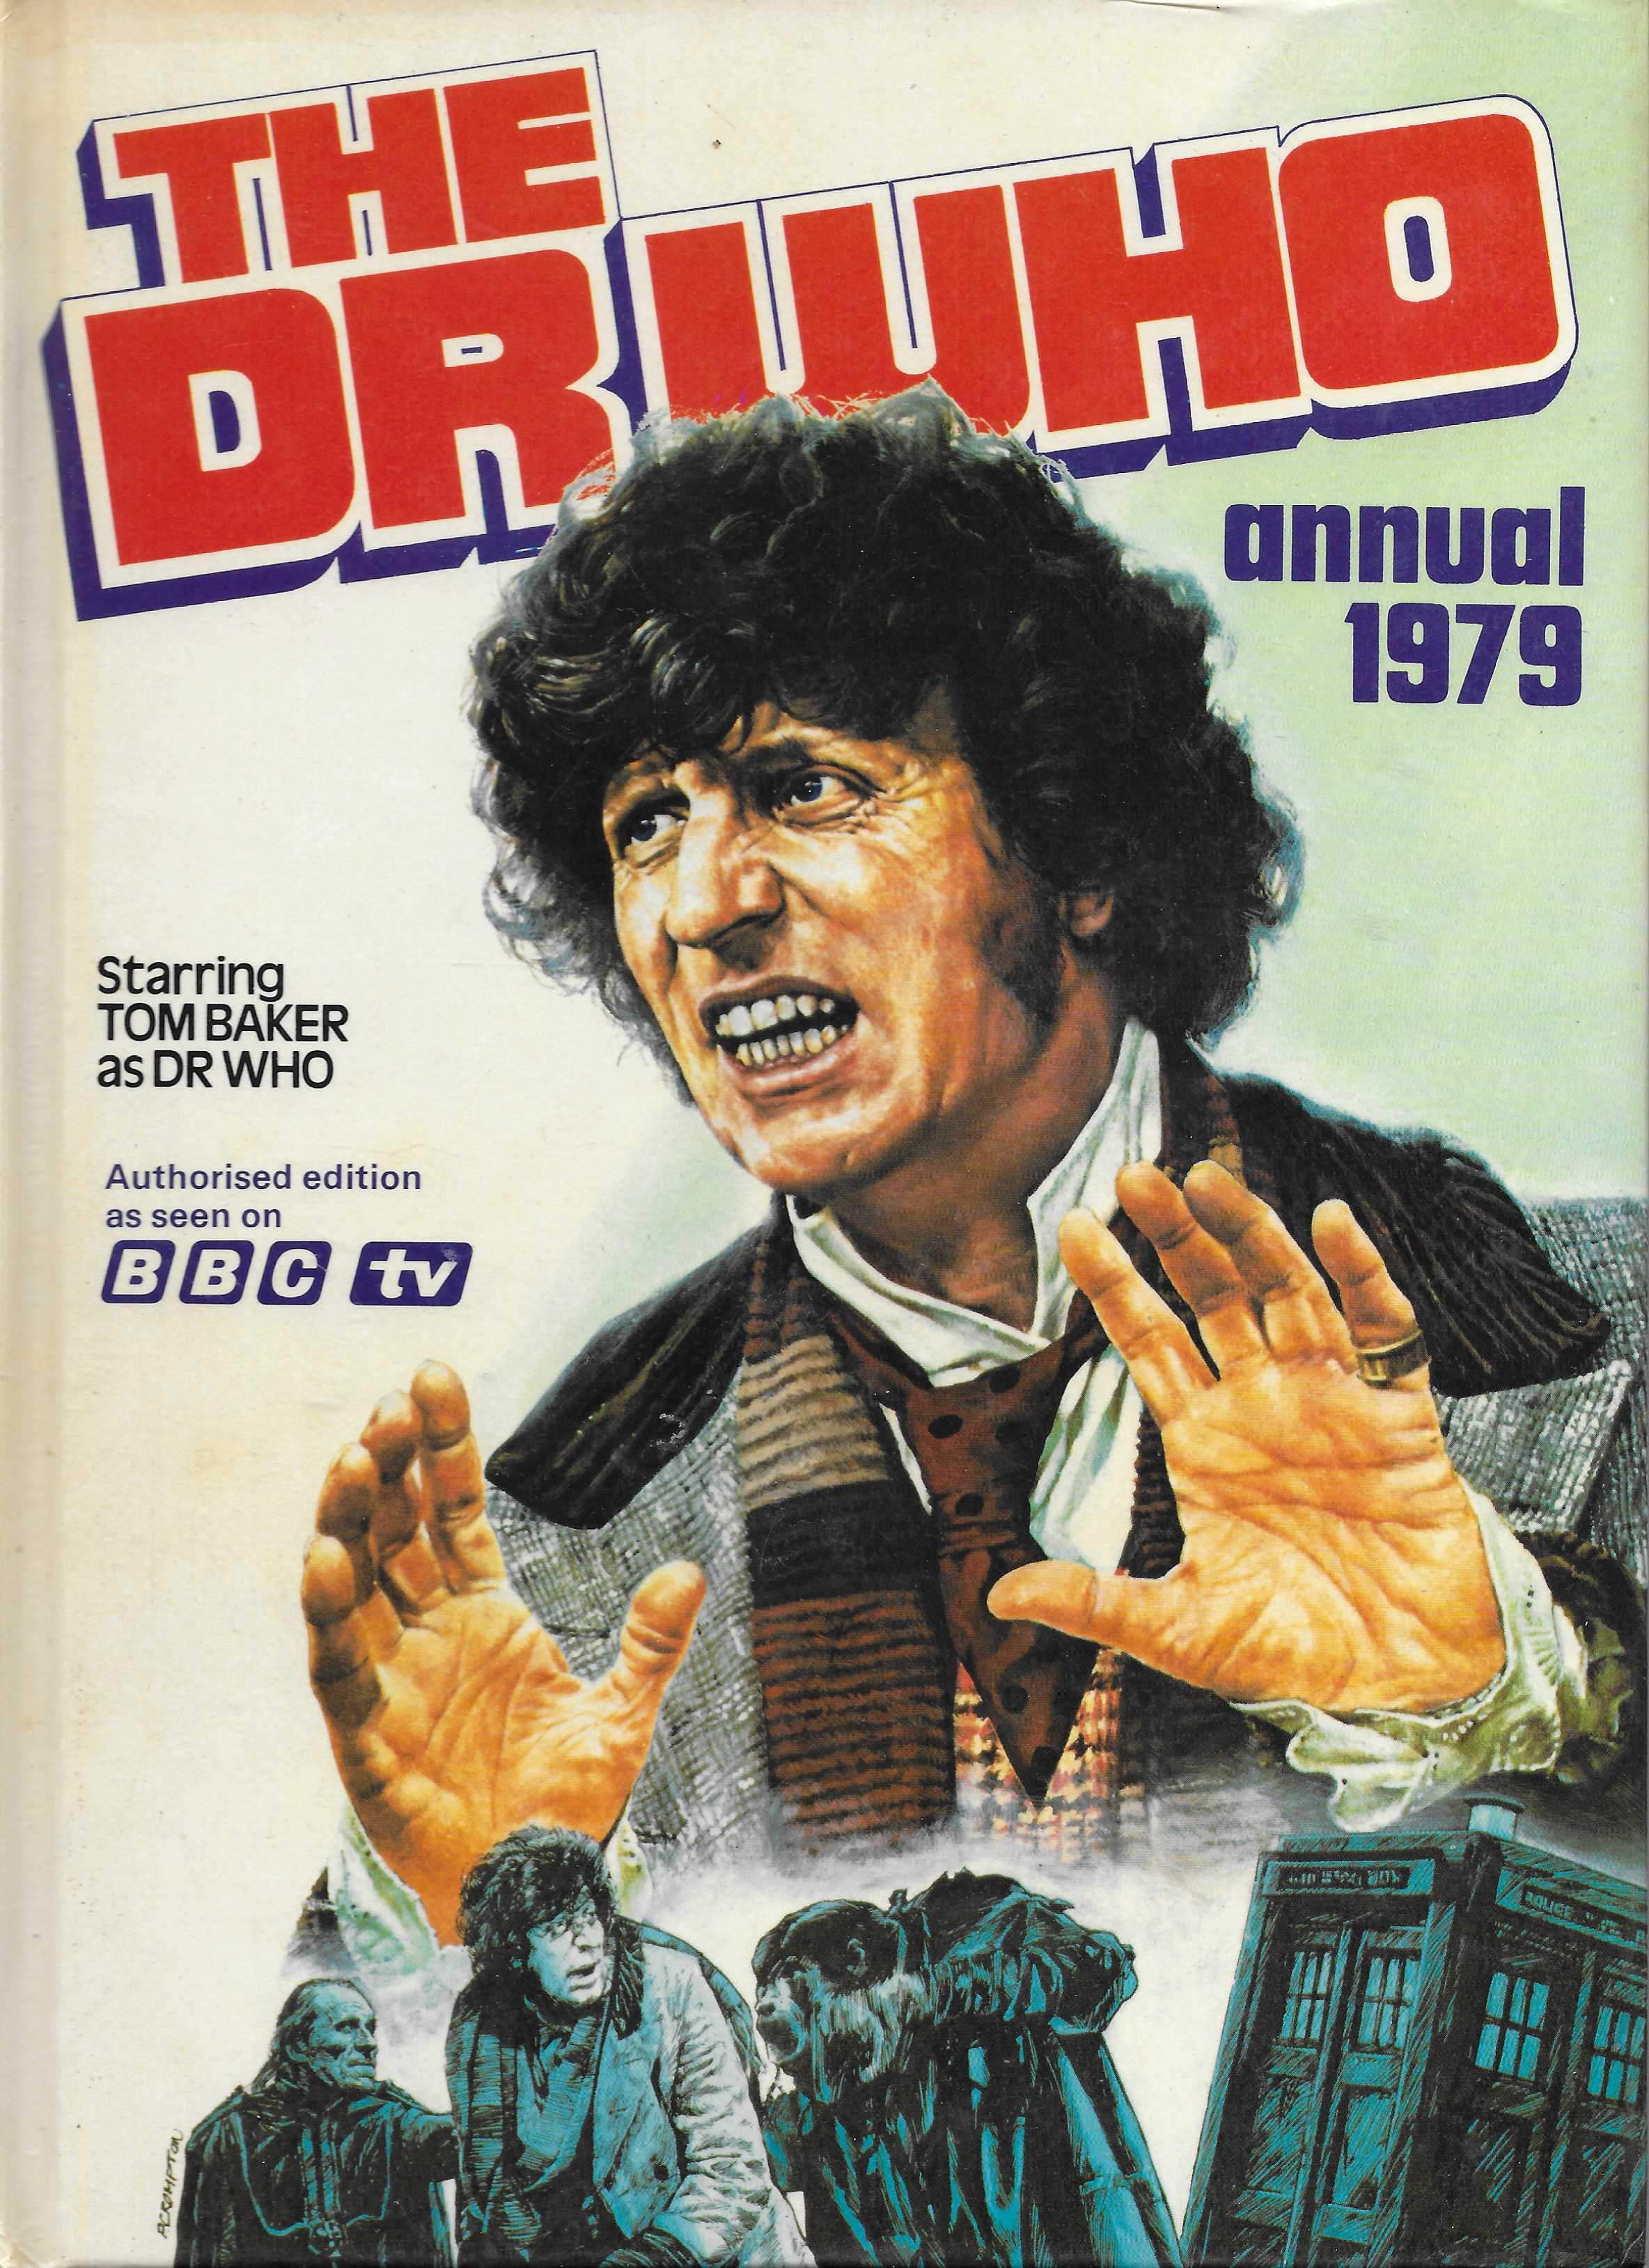 Picture of SBN 7235 0491 1 The Dr Who annual 1979 by artist Various from the BBC books - Records and Tapes library